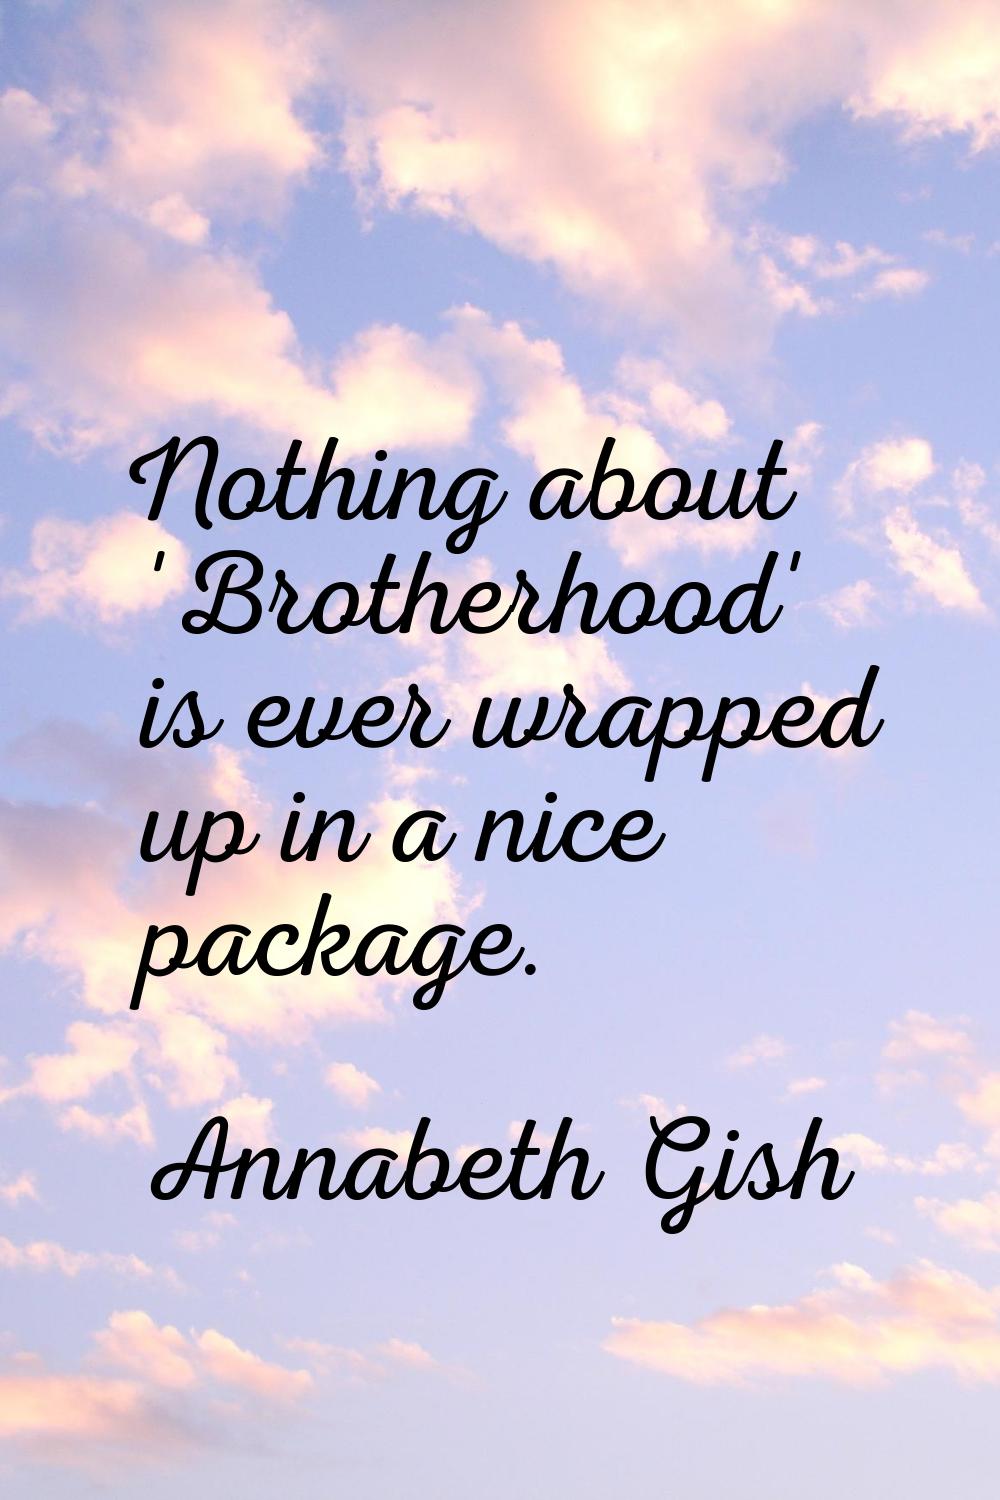 Nothing about 'Brotherhood' is ever wrapped up in a nice package.